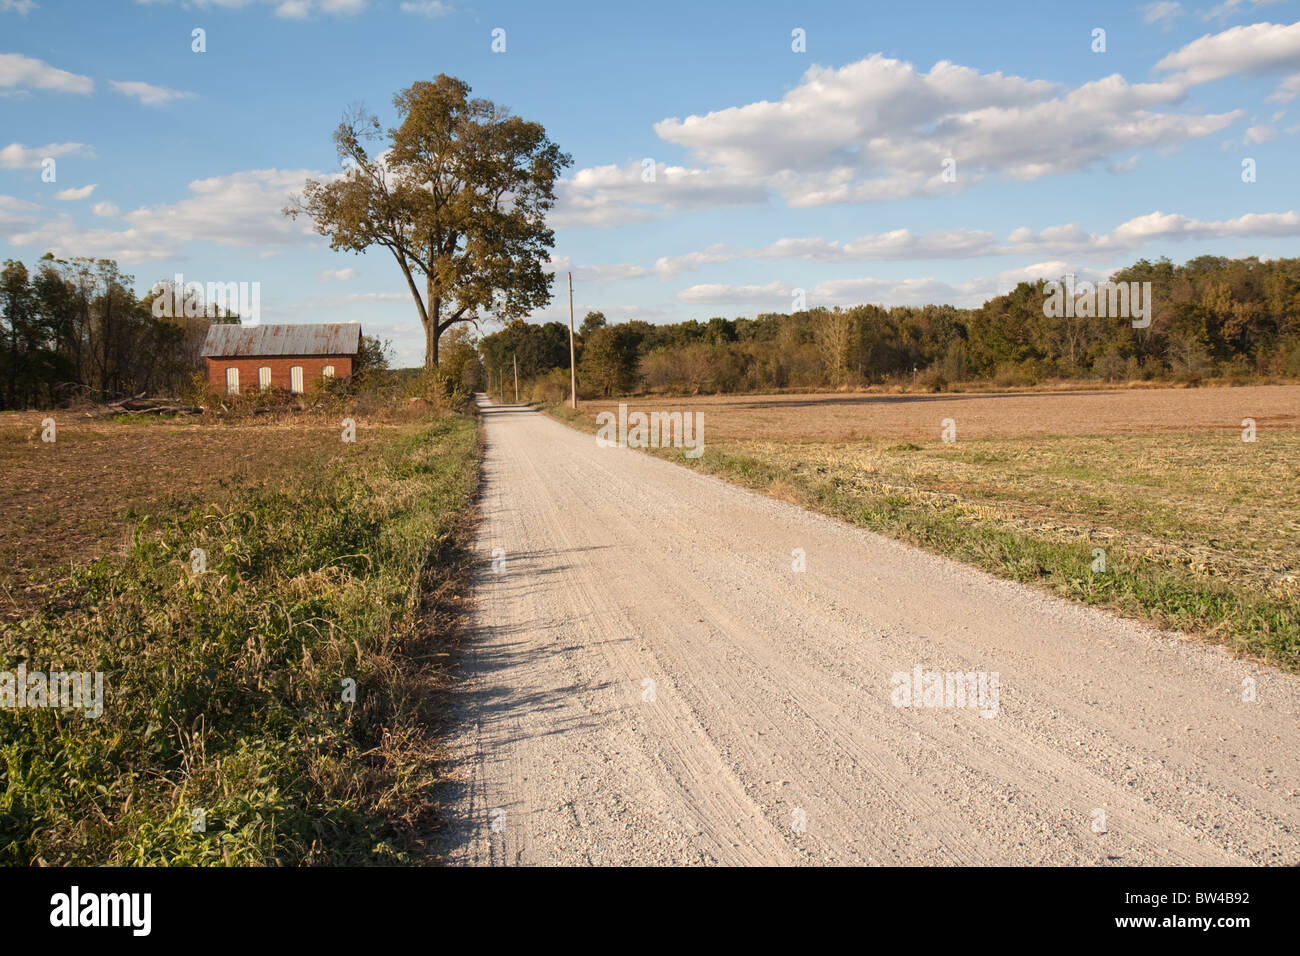 Abandoned on-room schoolhouse on a rural, gravel road in Indiana with a large tree, bright blue sky and clouds Stock Photo